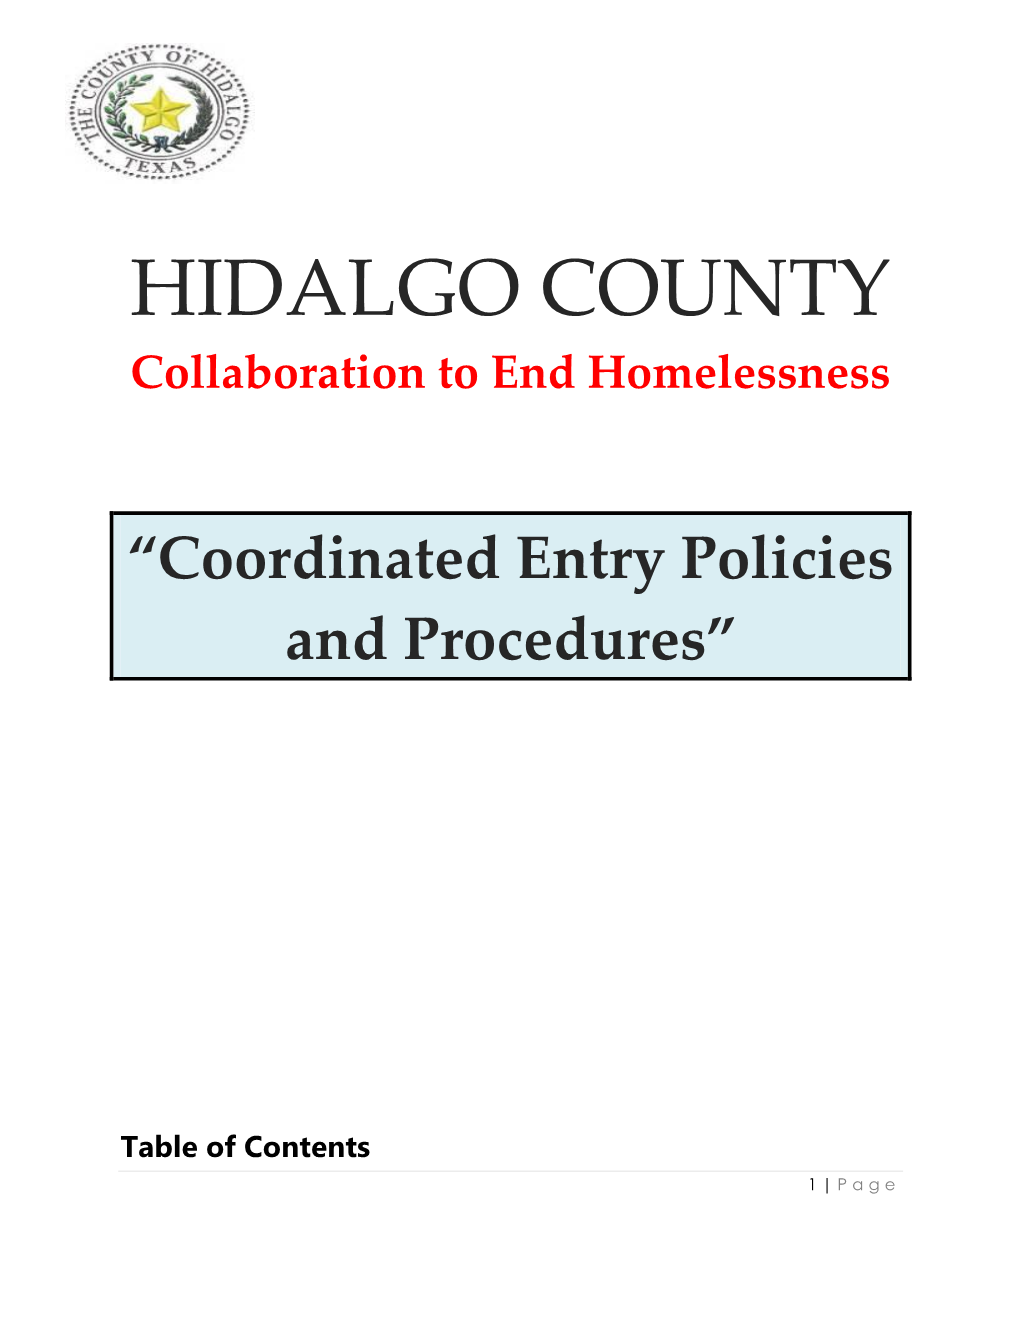 HIDALGO COUNTY Collaboration to End Homelessness